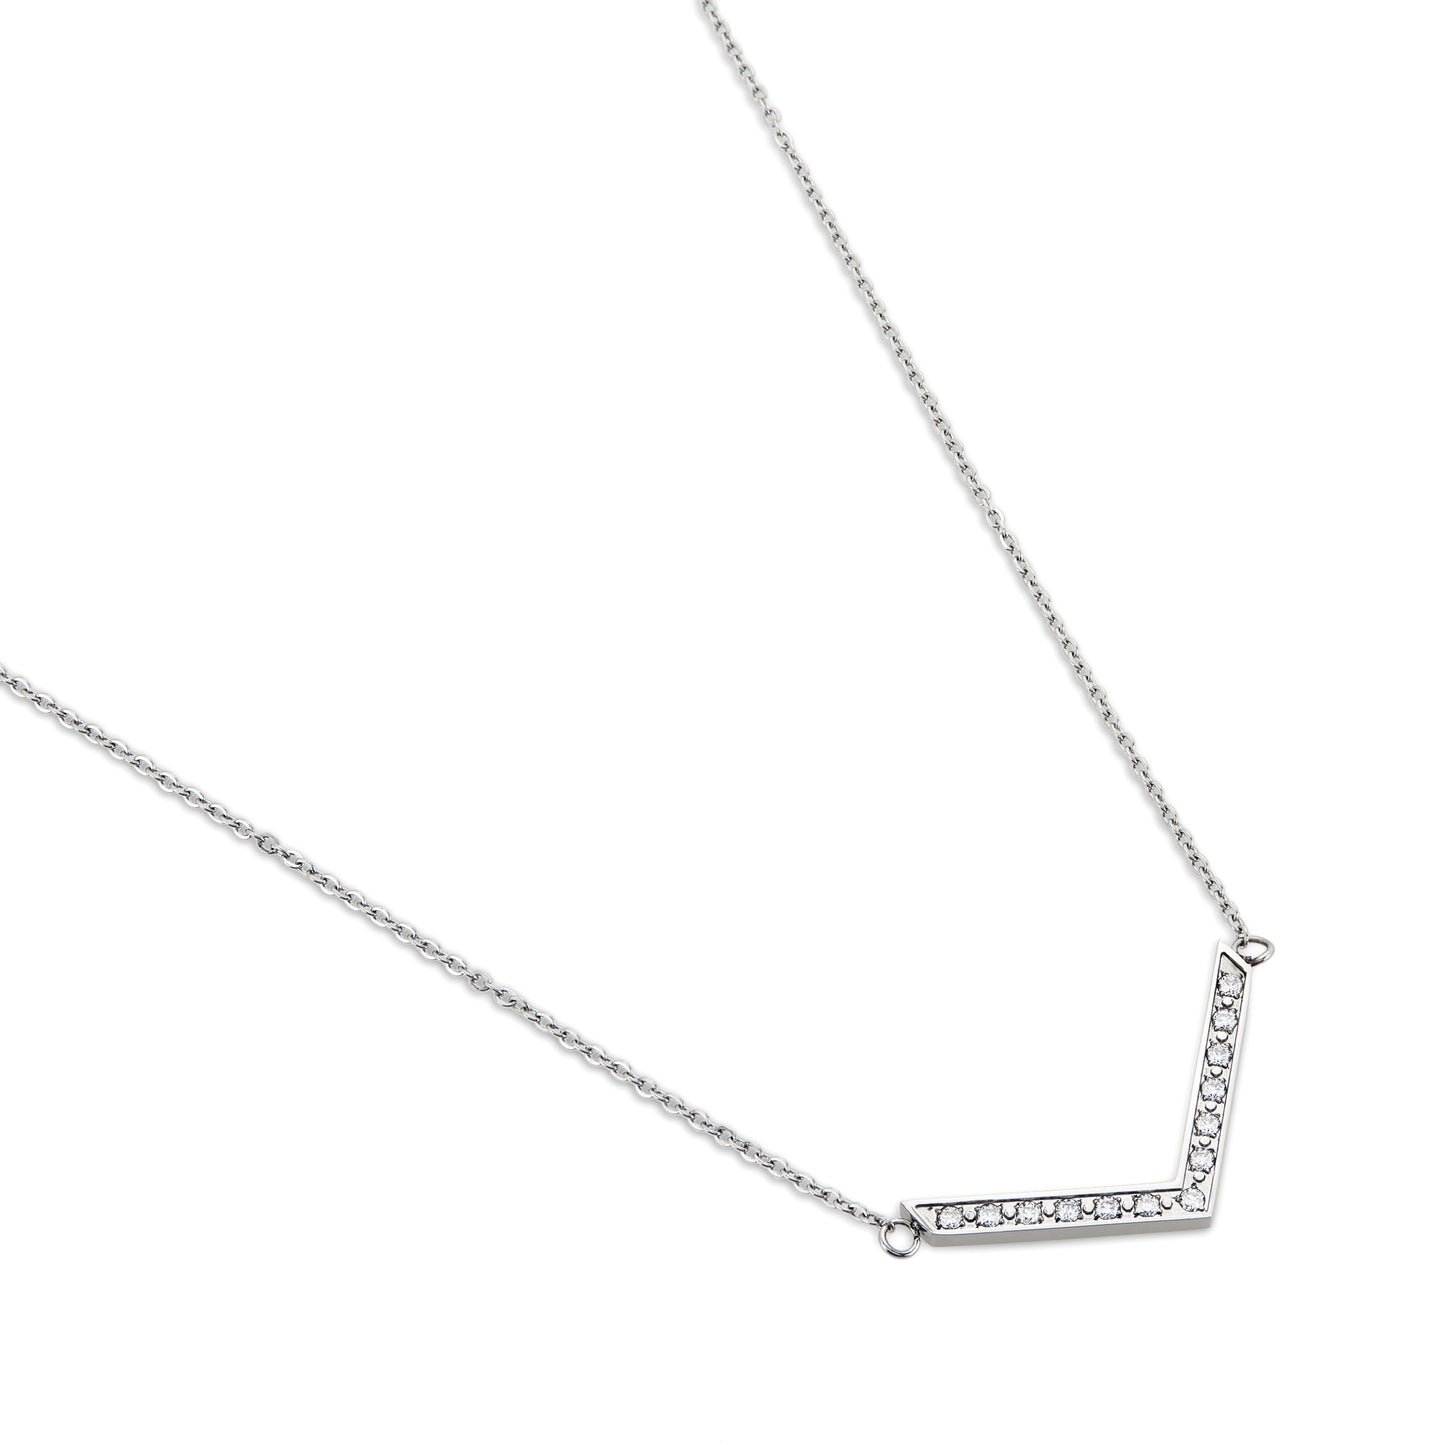 ELYA Women's Cubic Zirconia Polished Chevron Stainless Steel Cable Chain Pendant Necklace